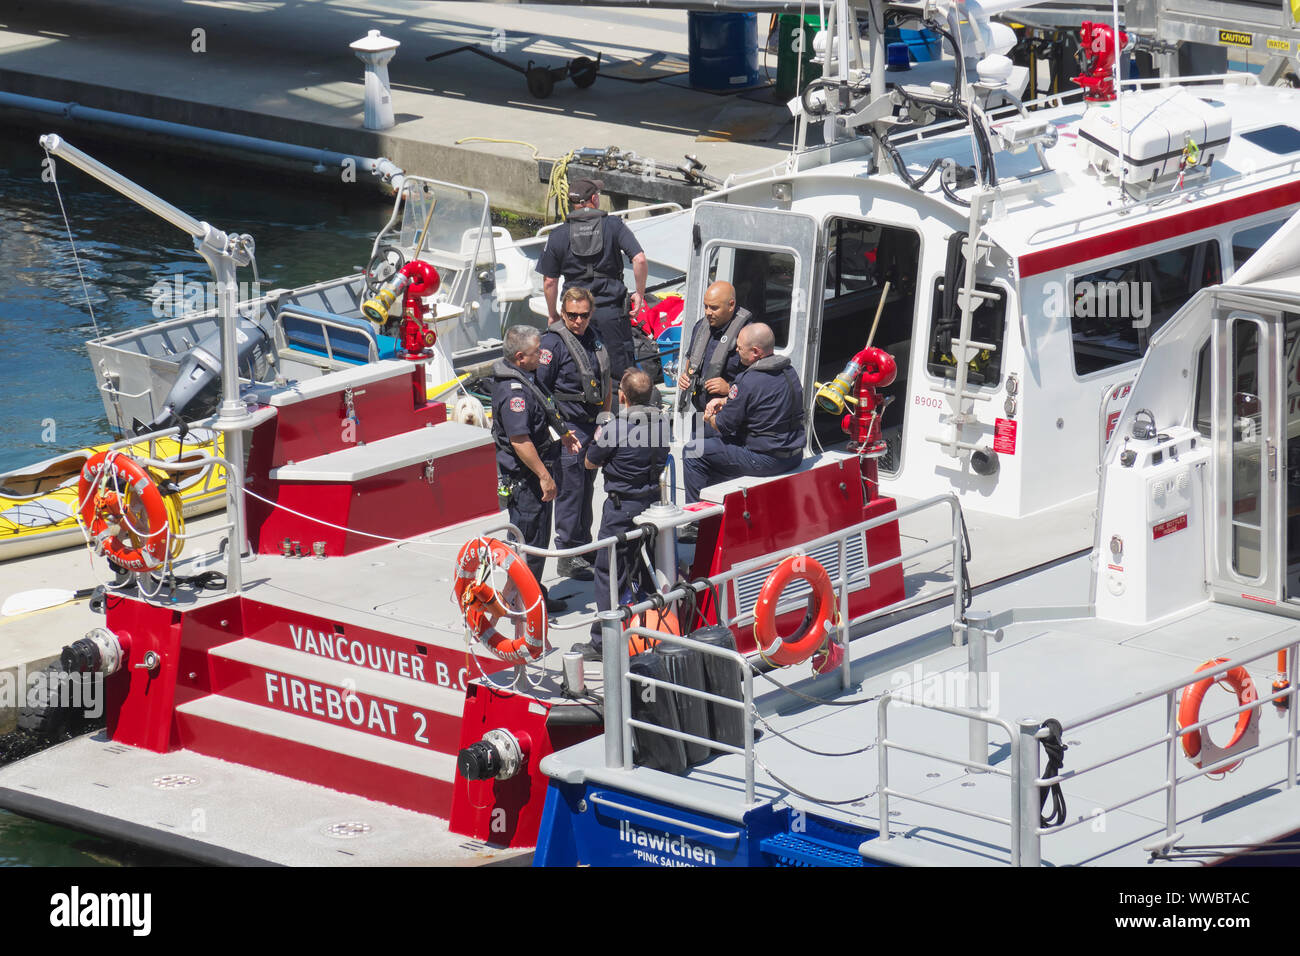 Fireboat 2 Moored in Coal Harbour with Fire Rescue Crew on Board, Vancouver Harbour, Vancouver, B. C., Canada. June 15, 2019 Stock Photo